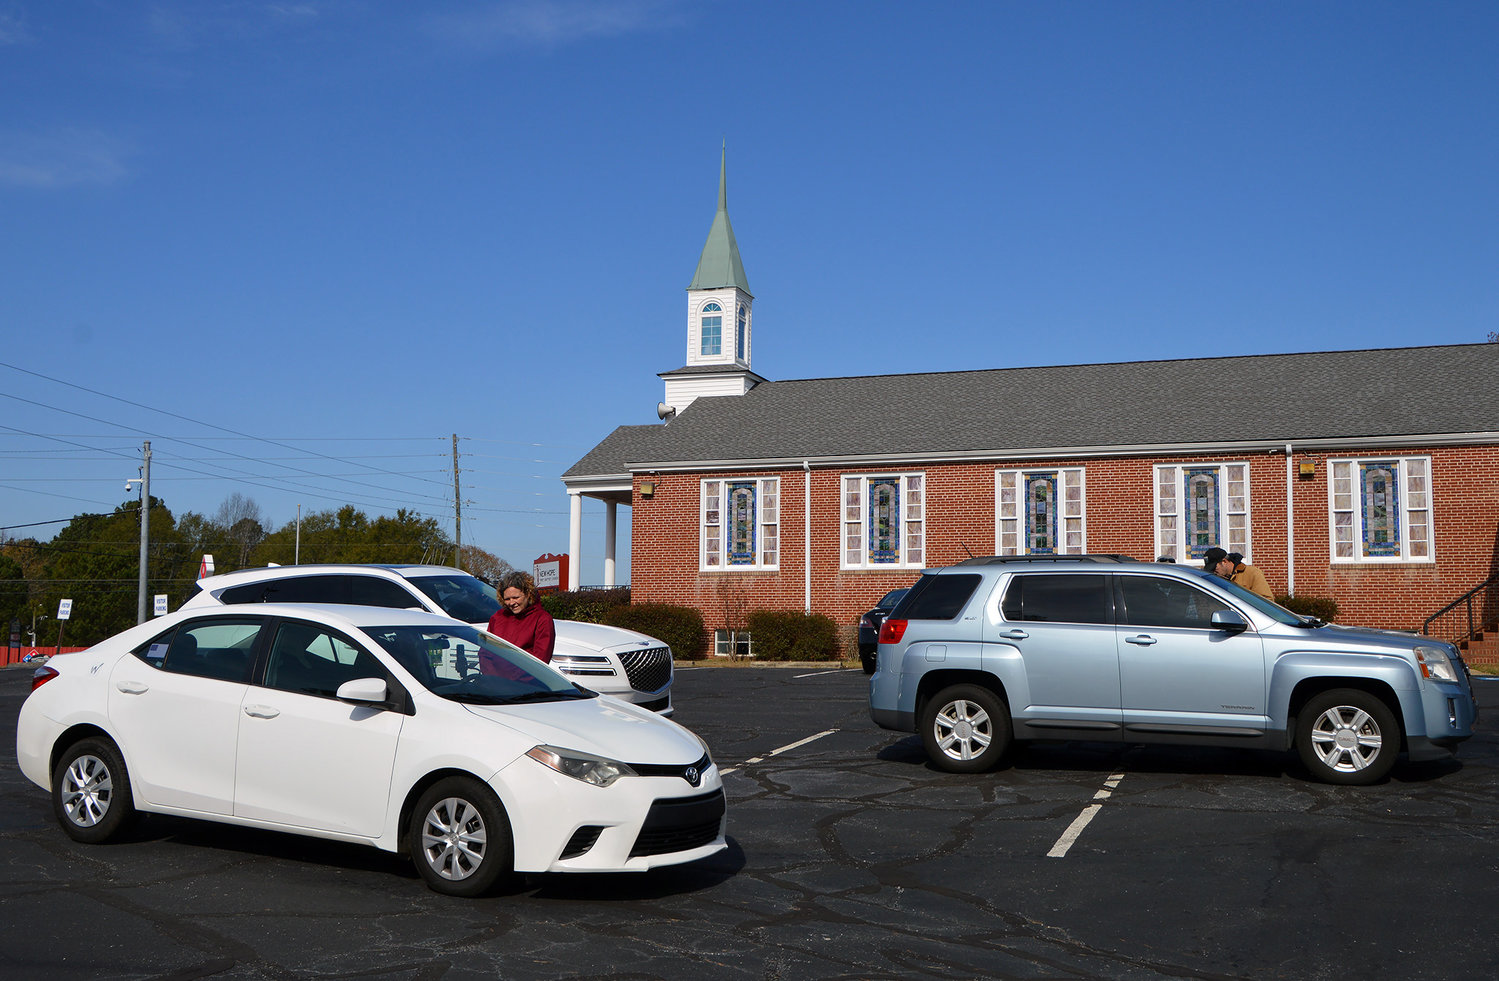 Debbie Lloyd, left, and Robby Hall speak to drivers who pulled into New Hope First Baptist Church for prayer on Saturday, Nov. 19, 2022, in Dallas, Ga. (Index/Henry Durand)